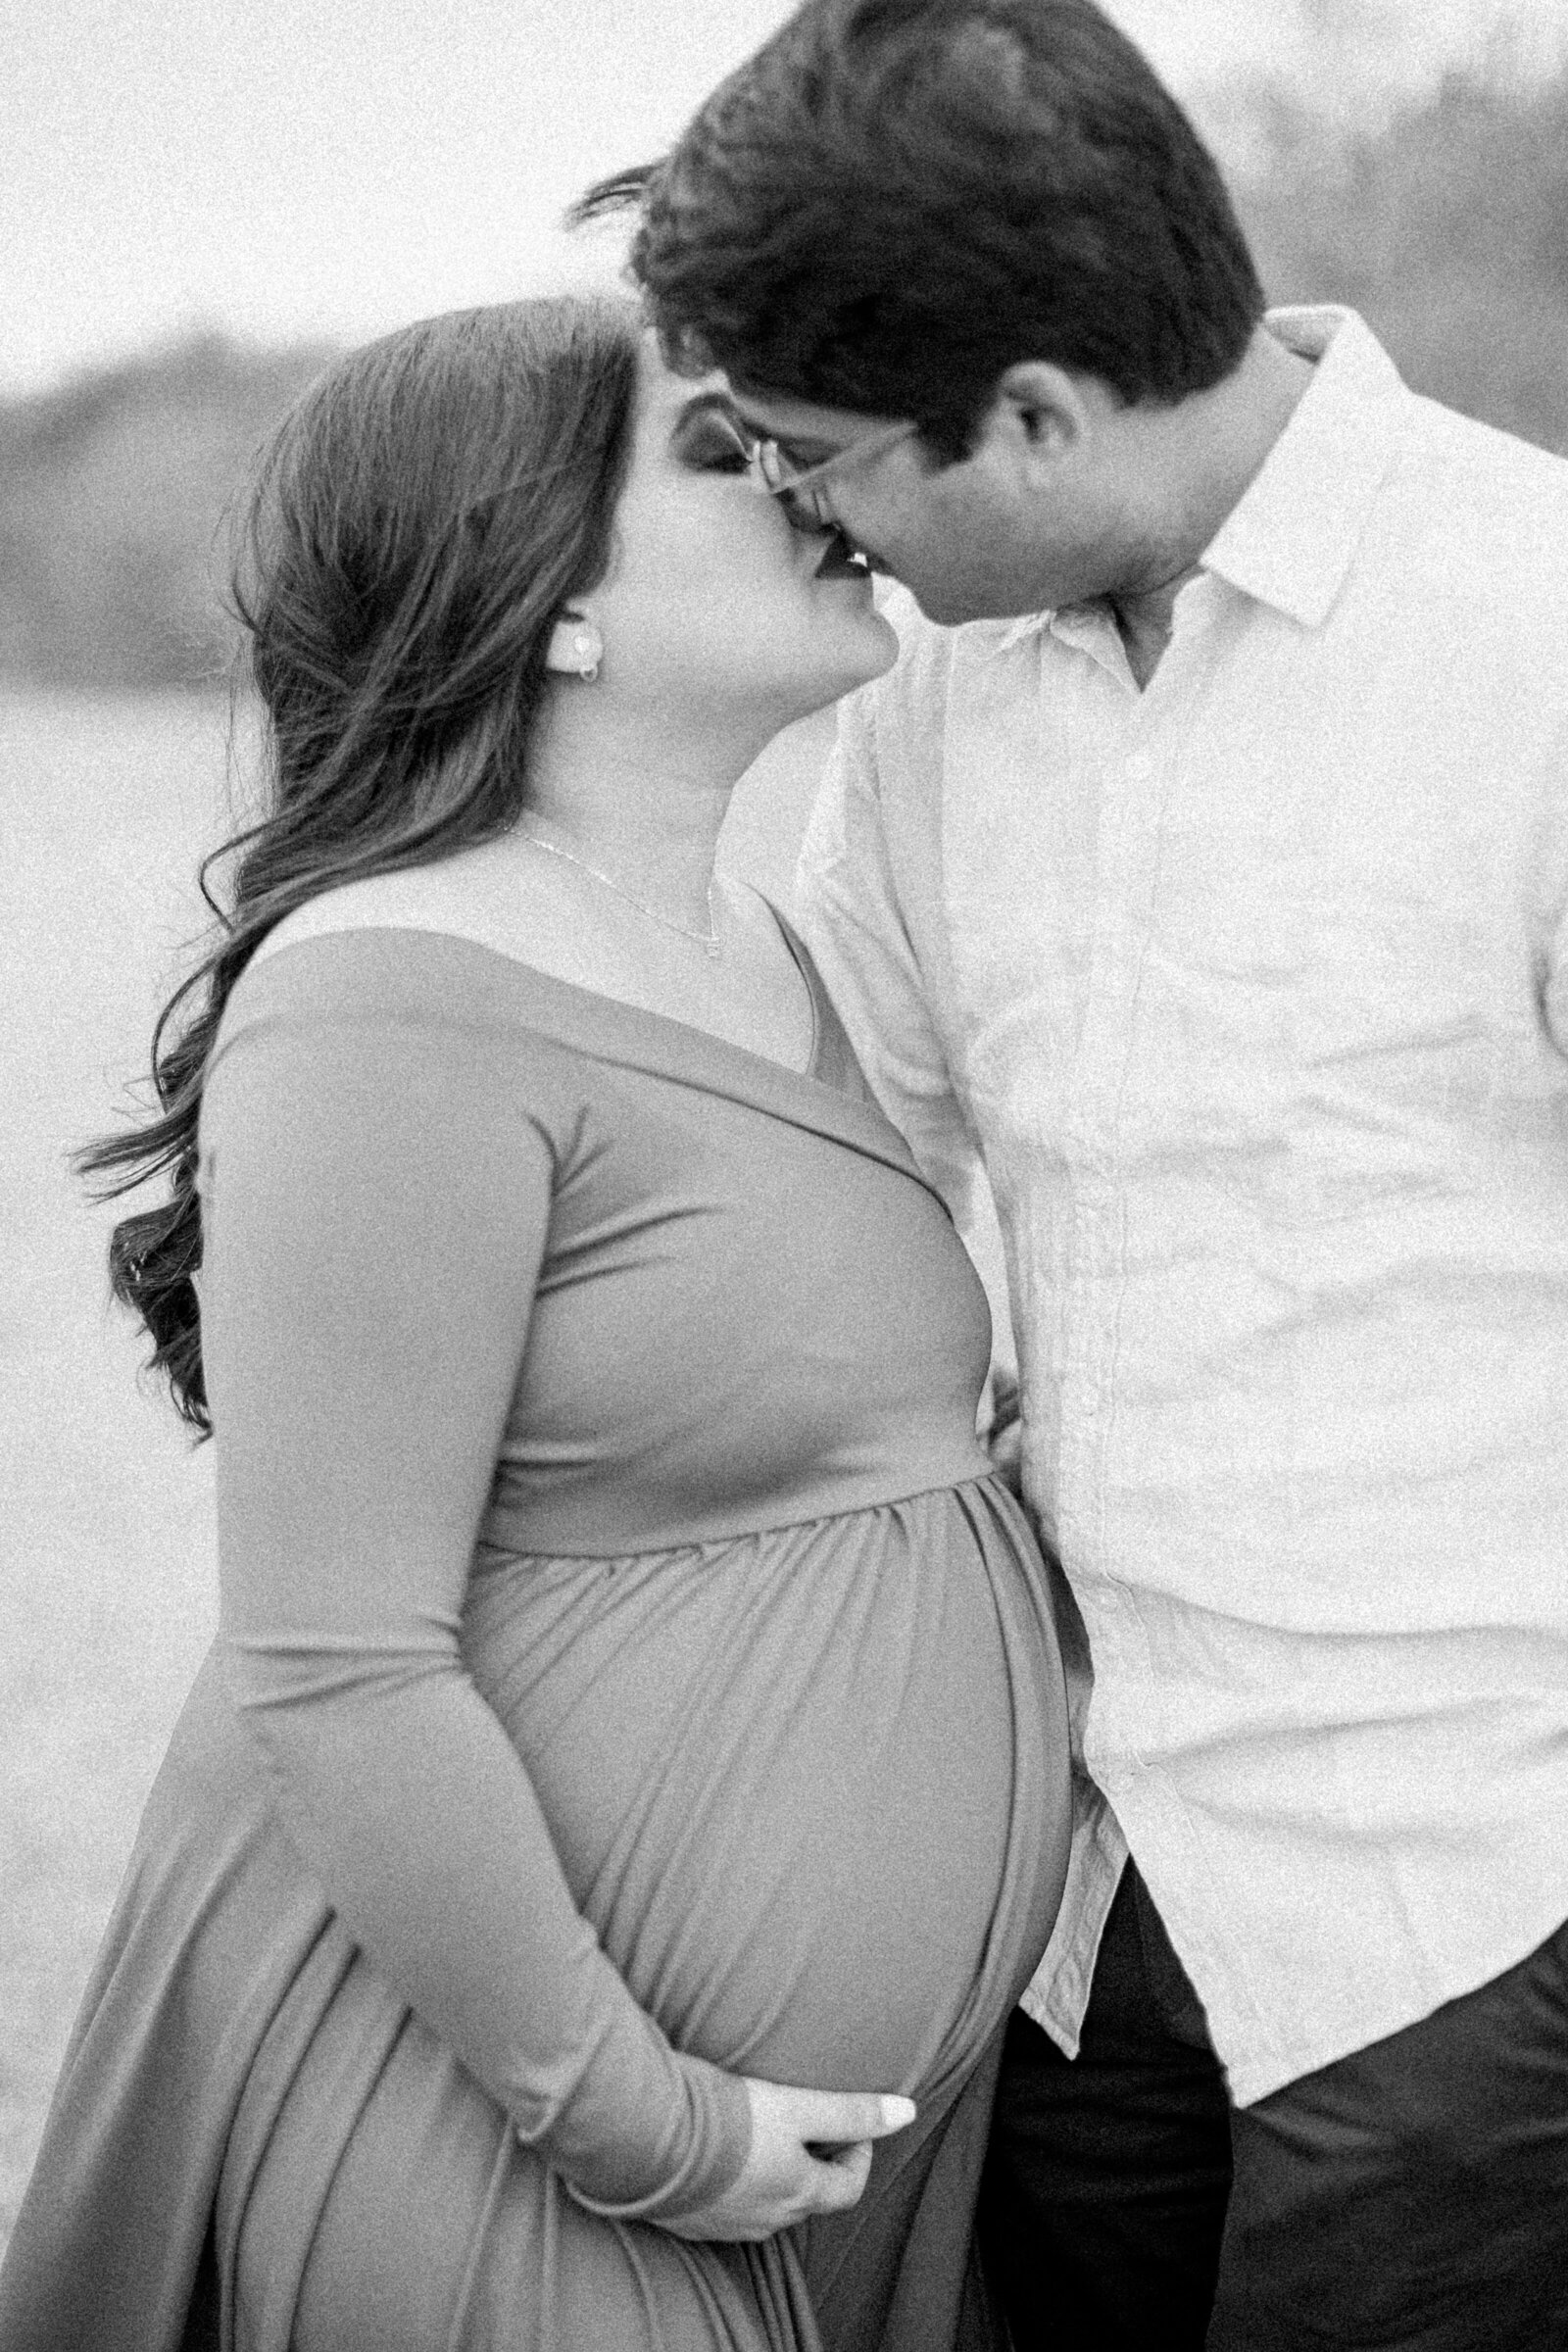 Black and white maternity photography.